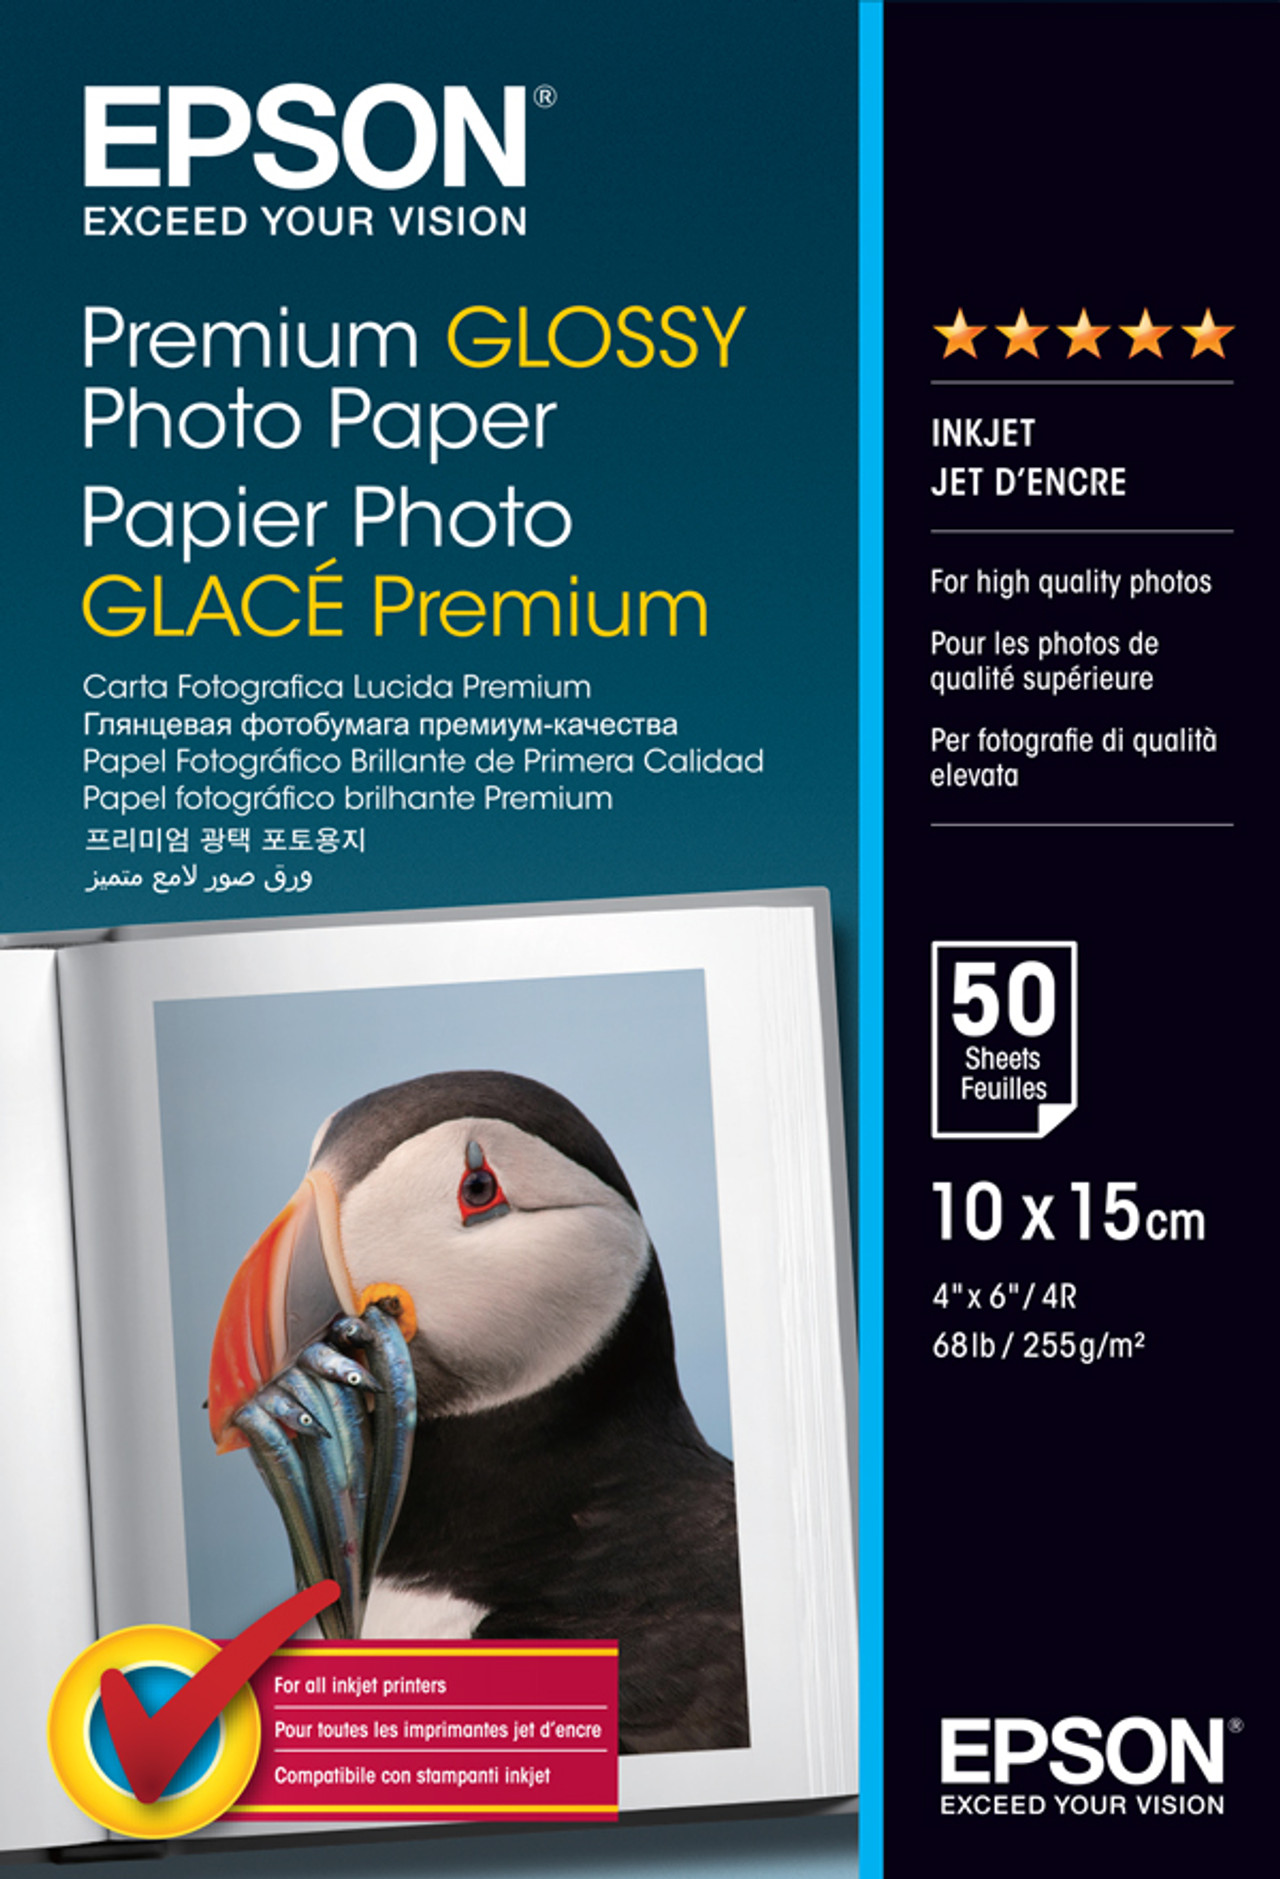 Epson Premium Glossy Photo Paper Pgpp 4x6 50 Sheets 255gsm2 S041729 Rosman Computers 6399